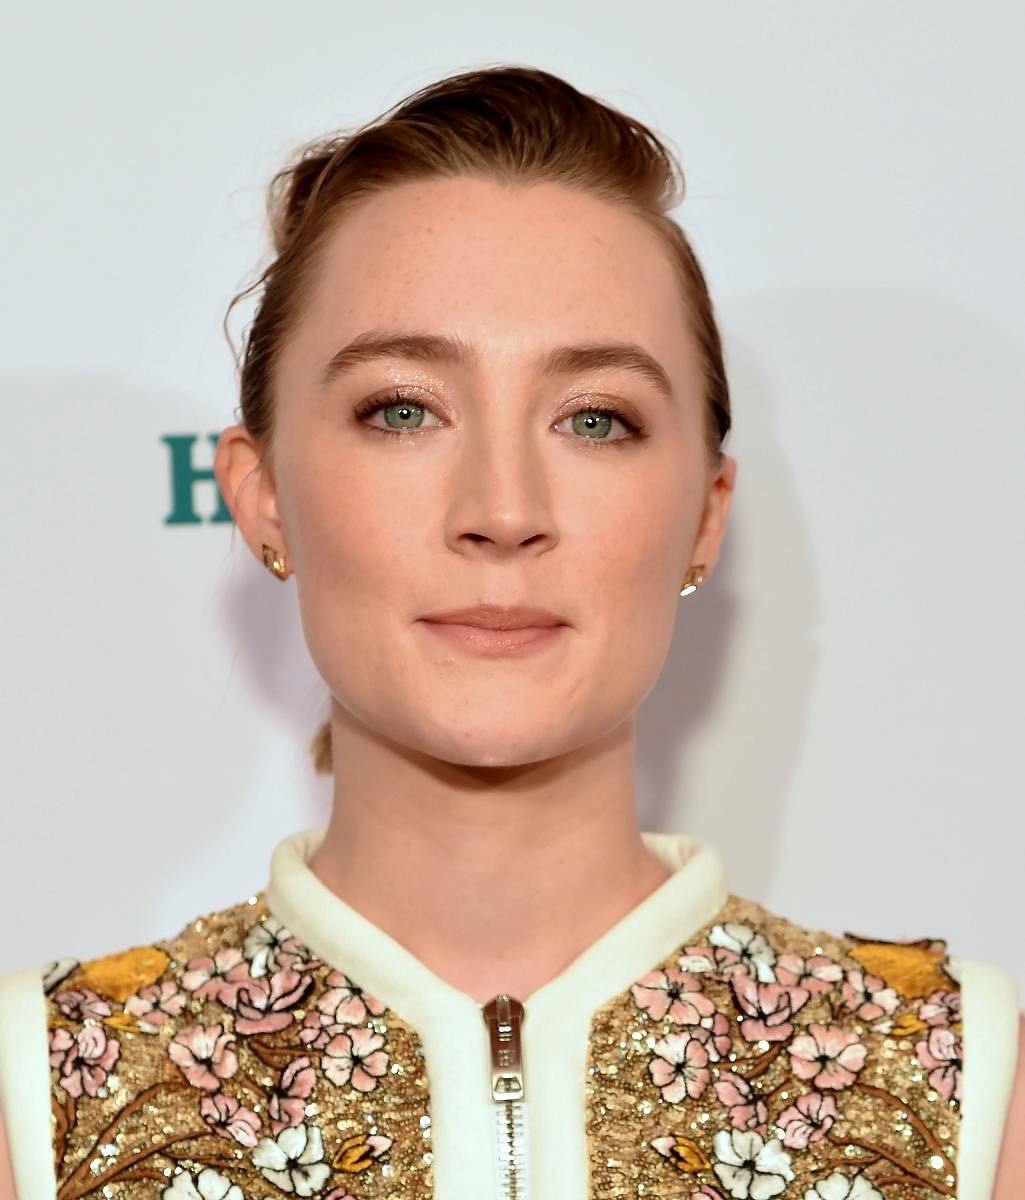 Saoirse Ronan says working with filmmakers like Greta Gerwig has inspired her to think seriously about direction. (Photo Credits: AFP)